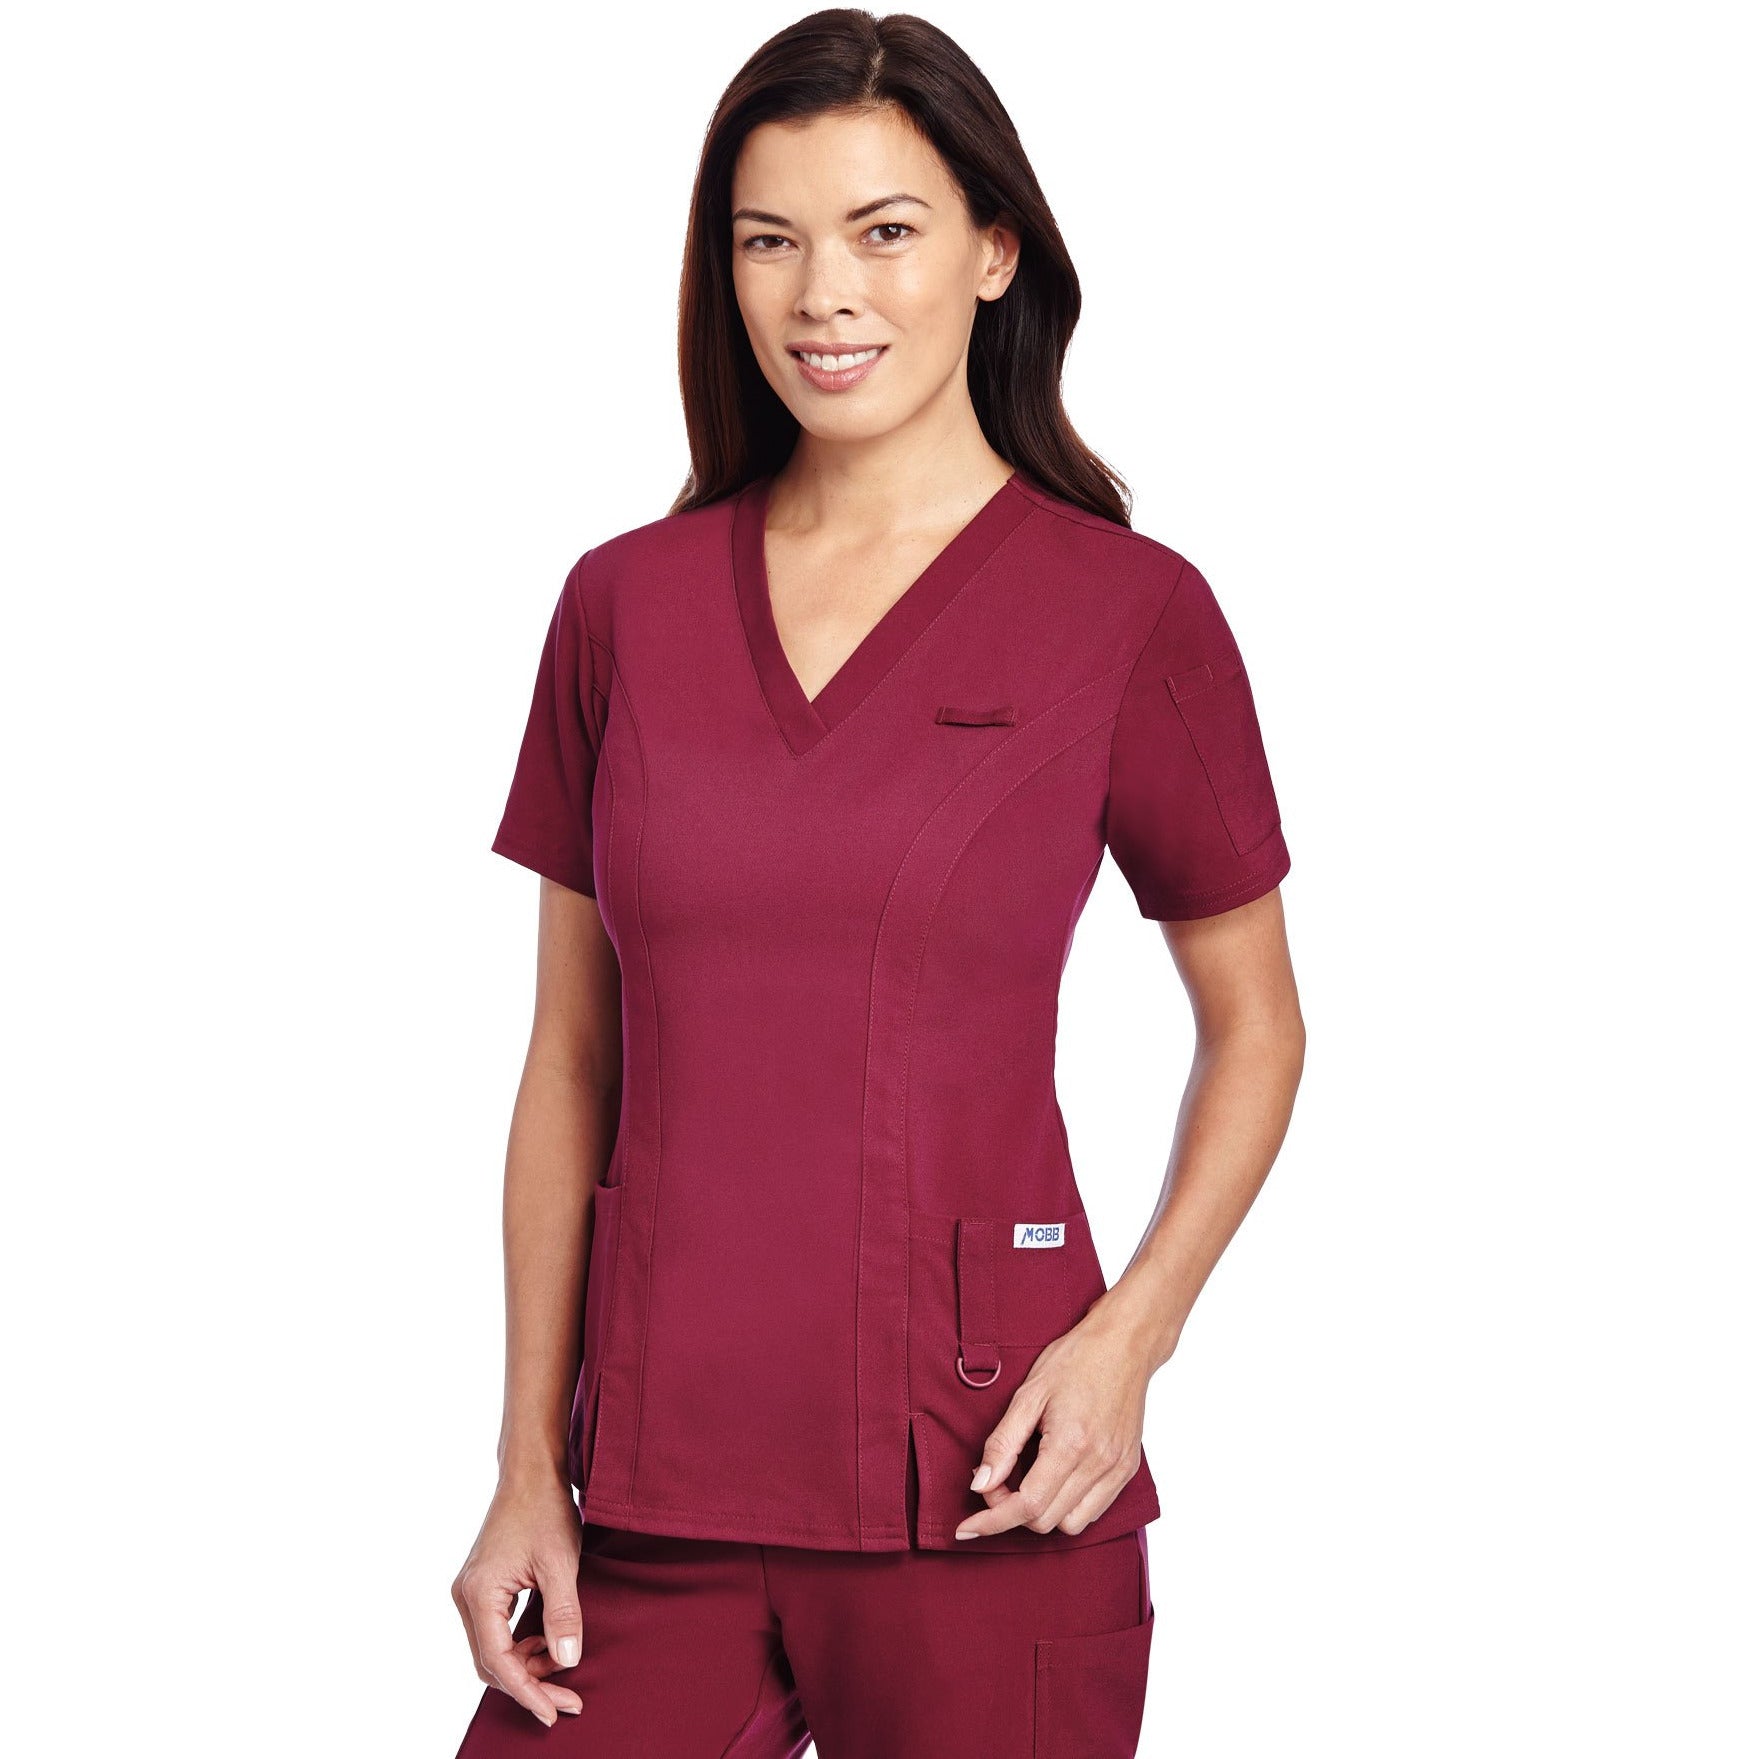 V-Neck Solid Color Scrub Top The Cathy T3050